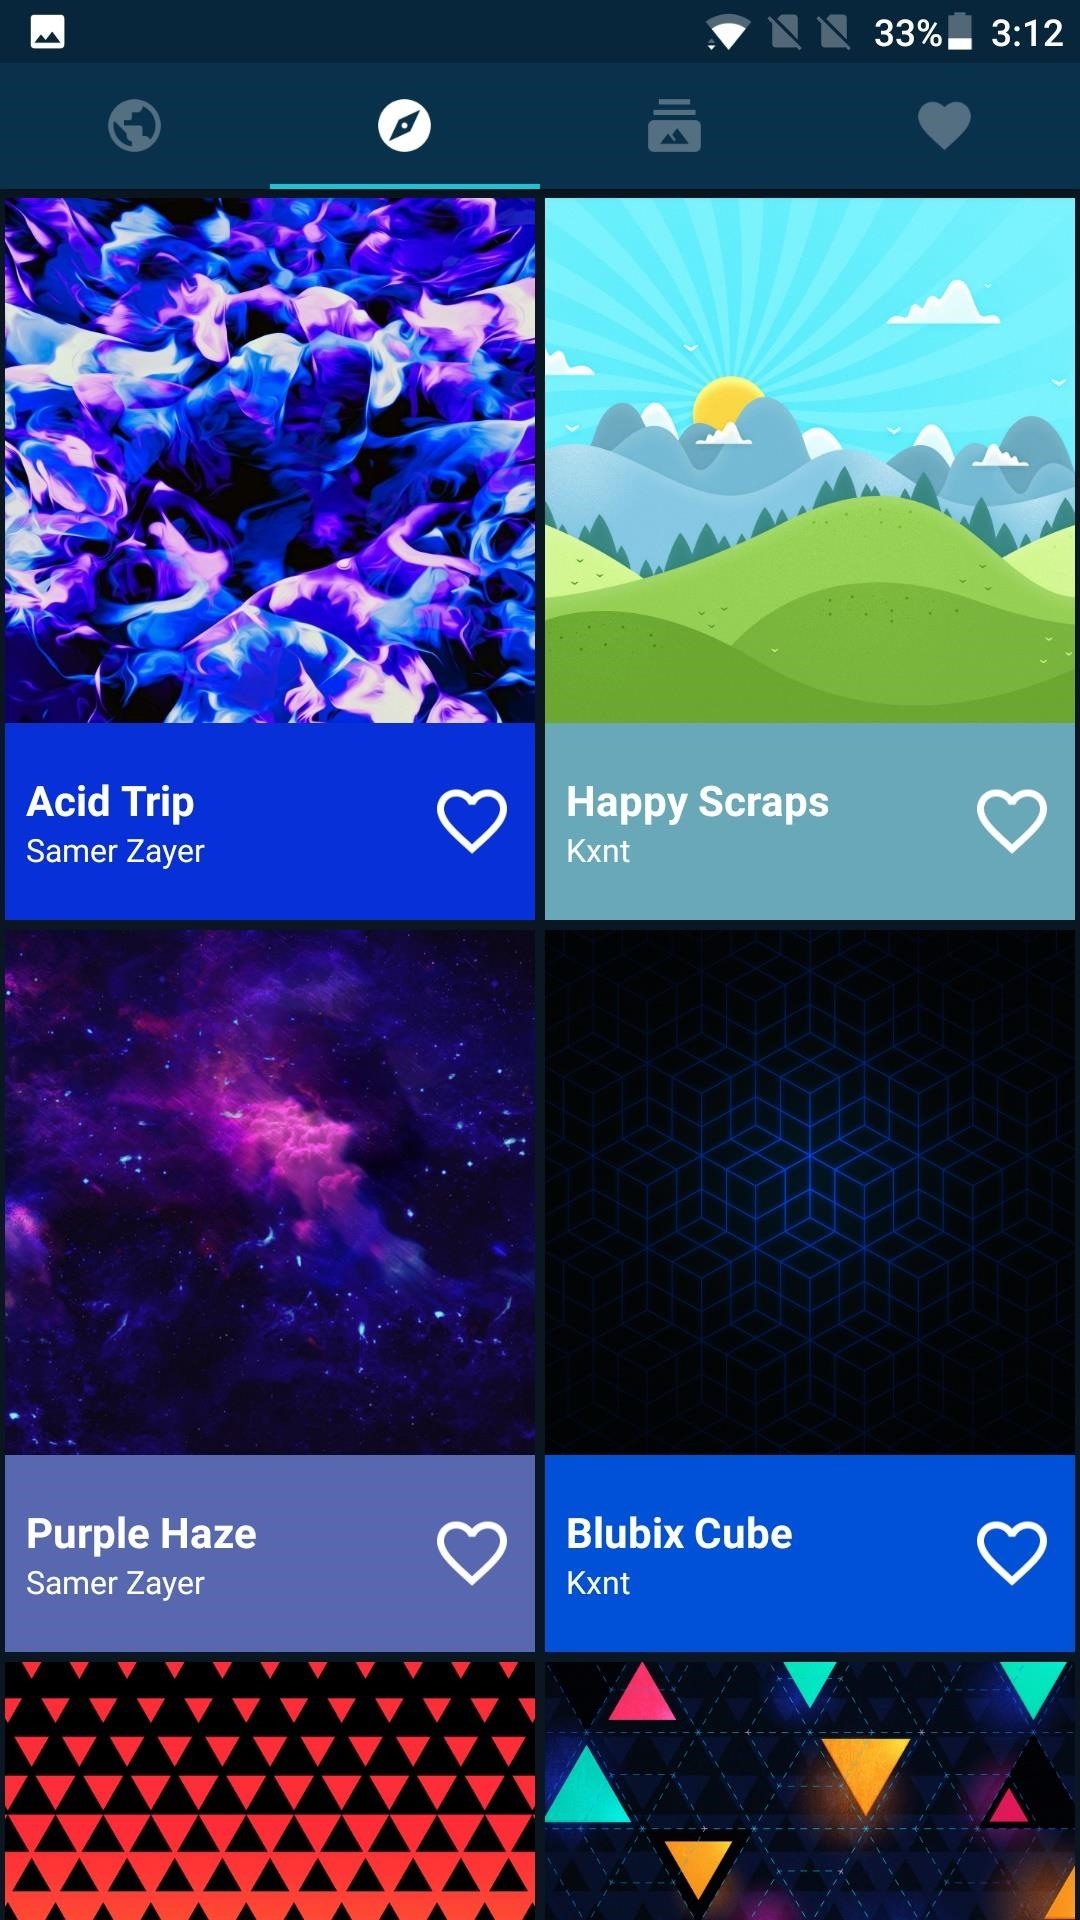 Top 7 Free Wallpaper Apps for Android Phones & Tablets